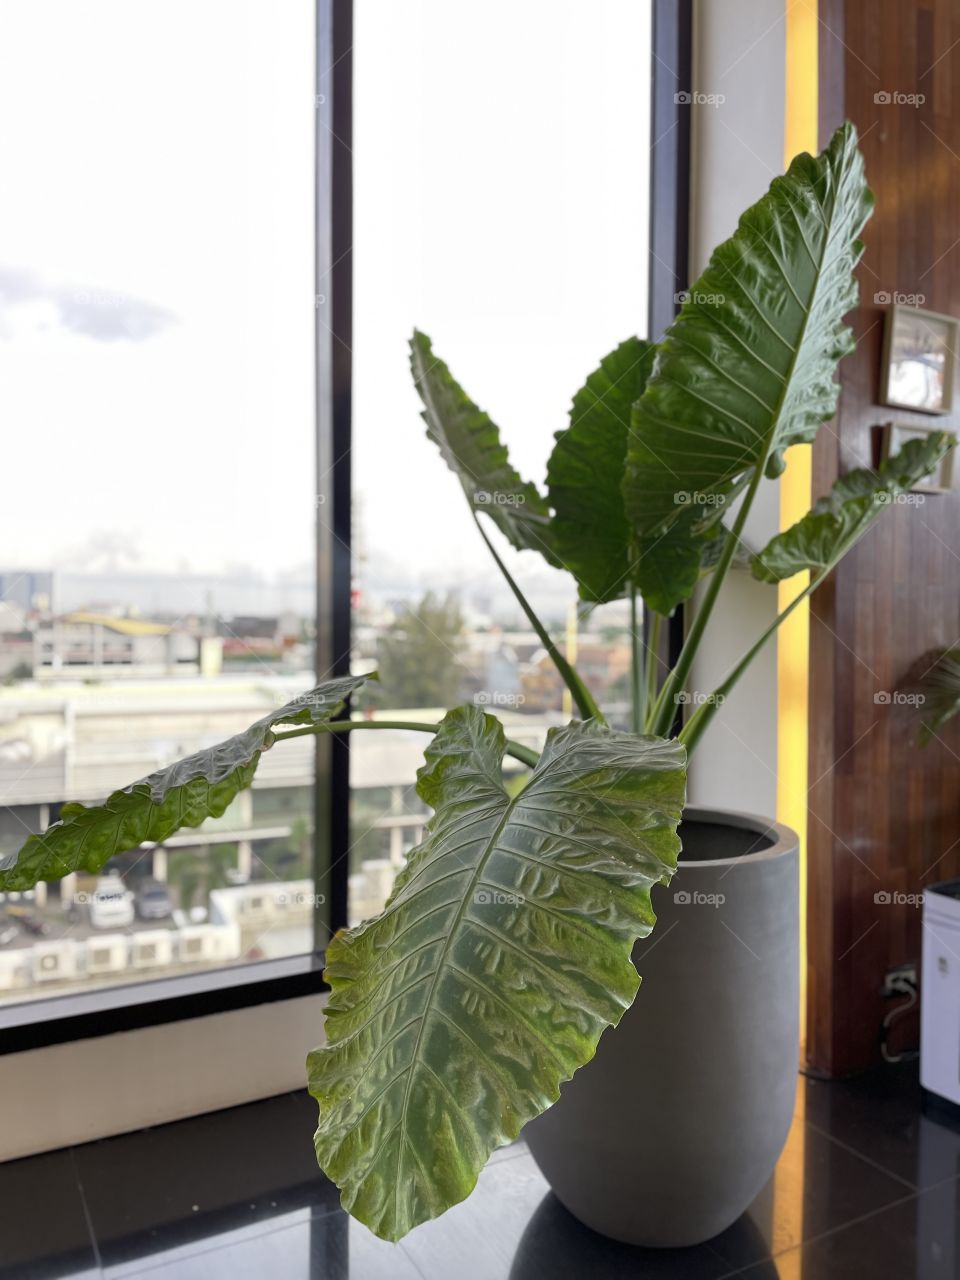 A huge indoor plant to liven up an office, restaurant or any corner at home.